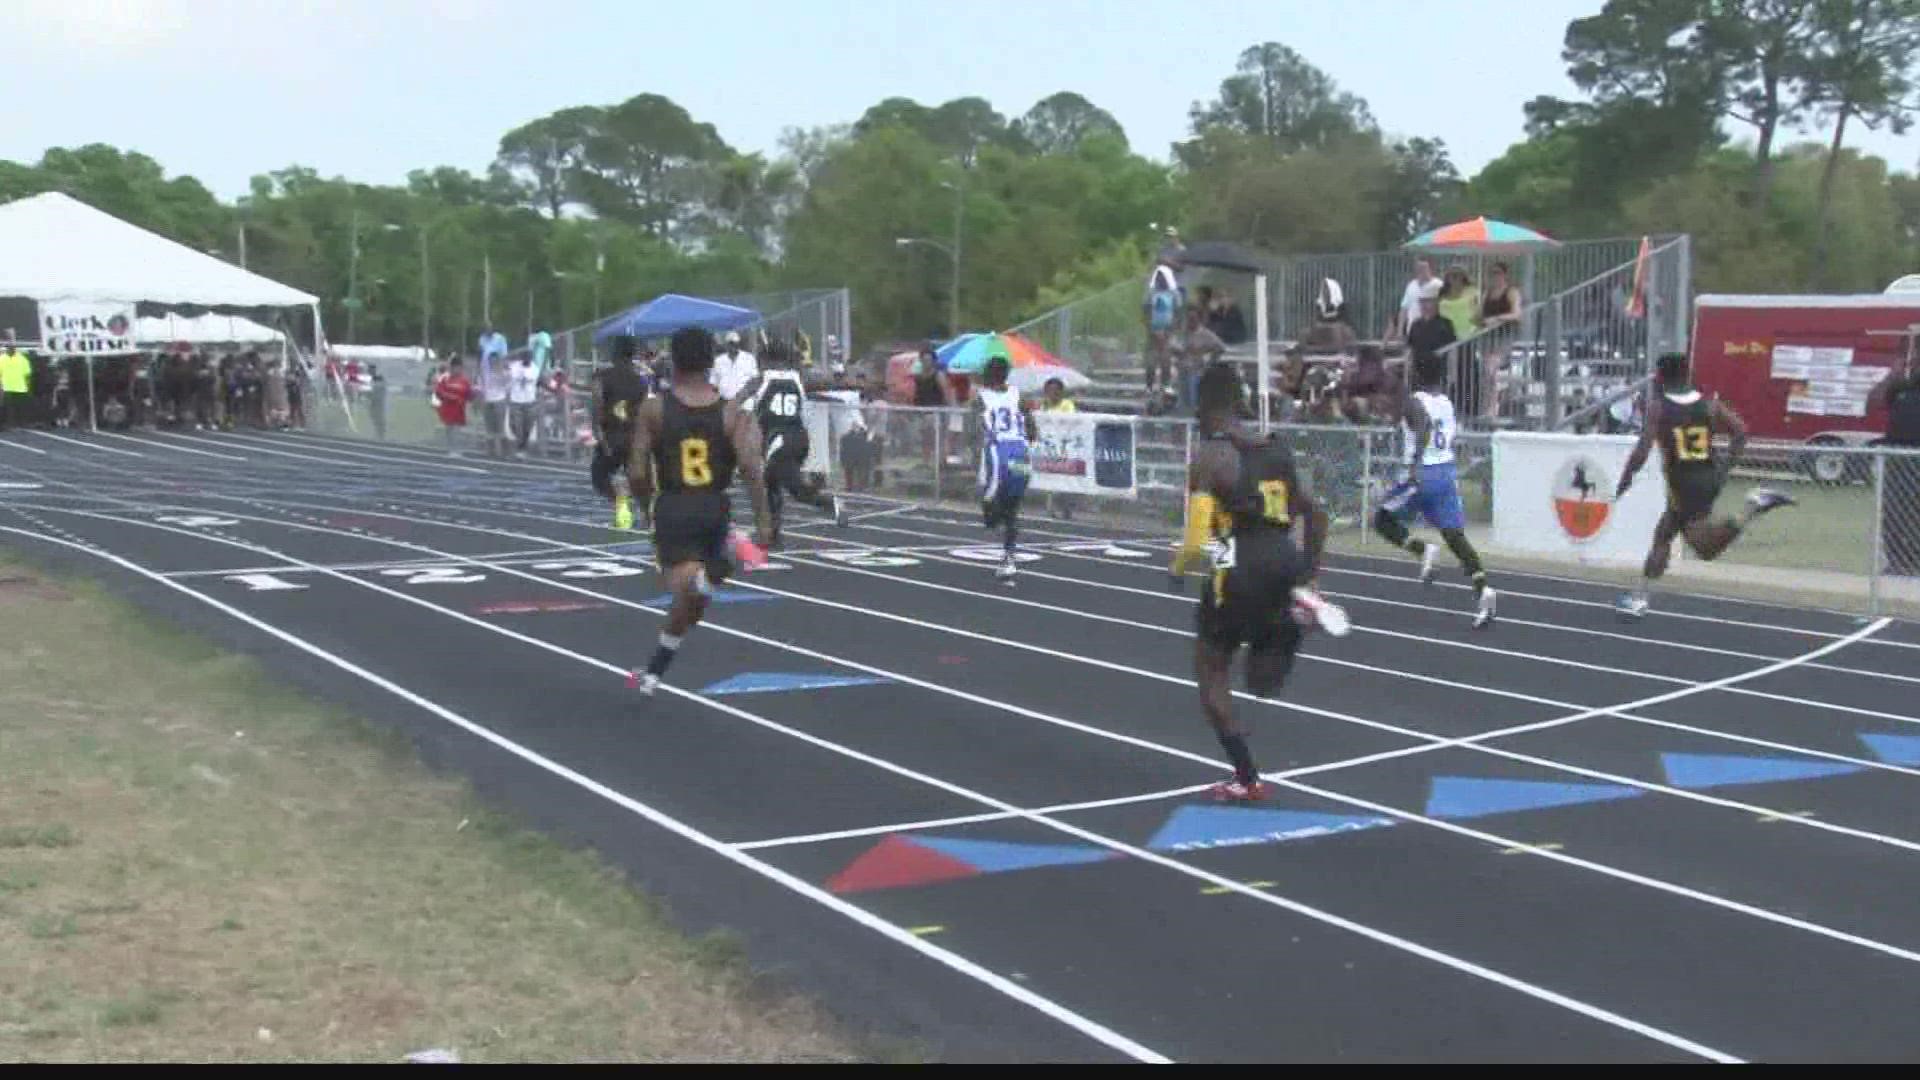 The Bob Hayes Invitational cited limited space and anticipated construction at Raines as reasons for the move.